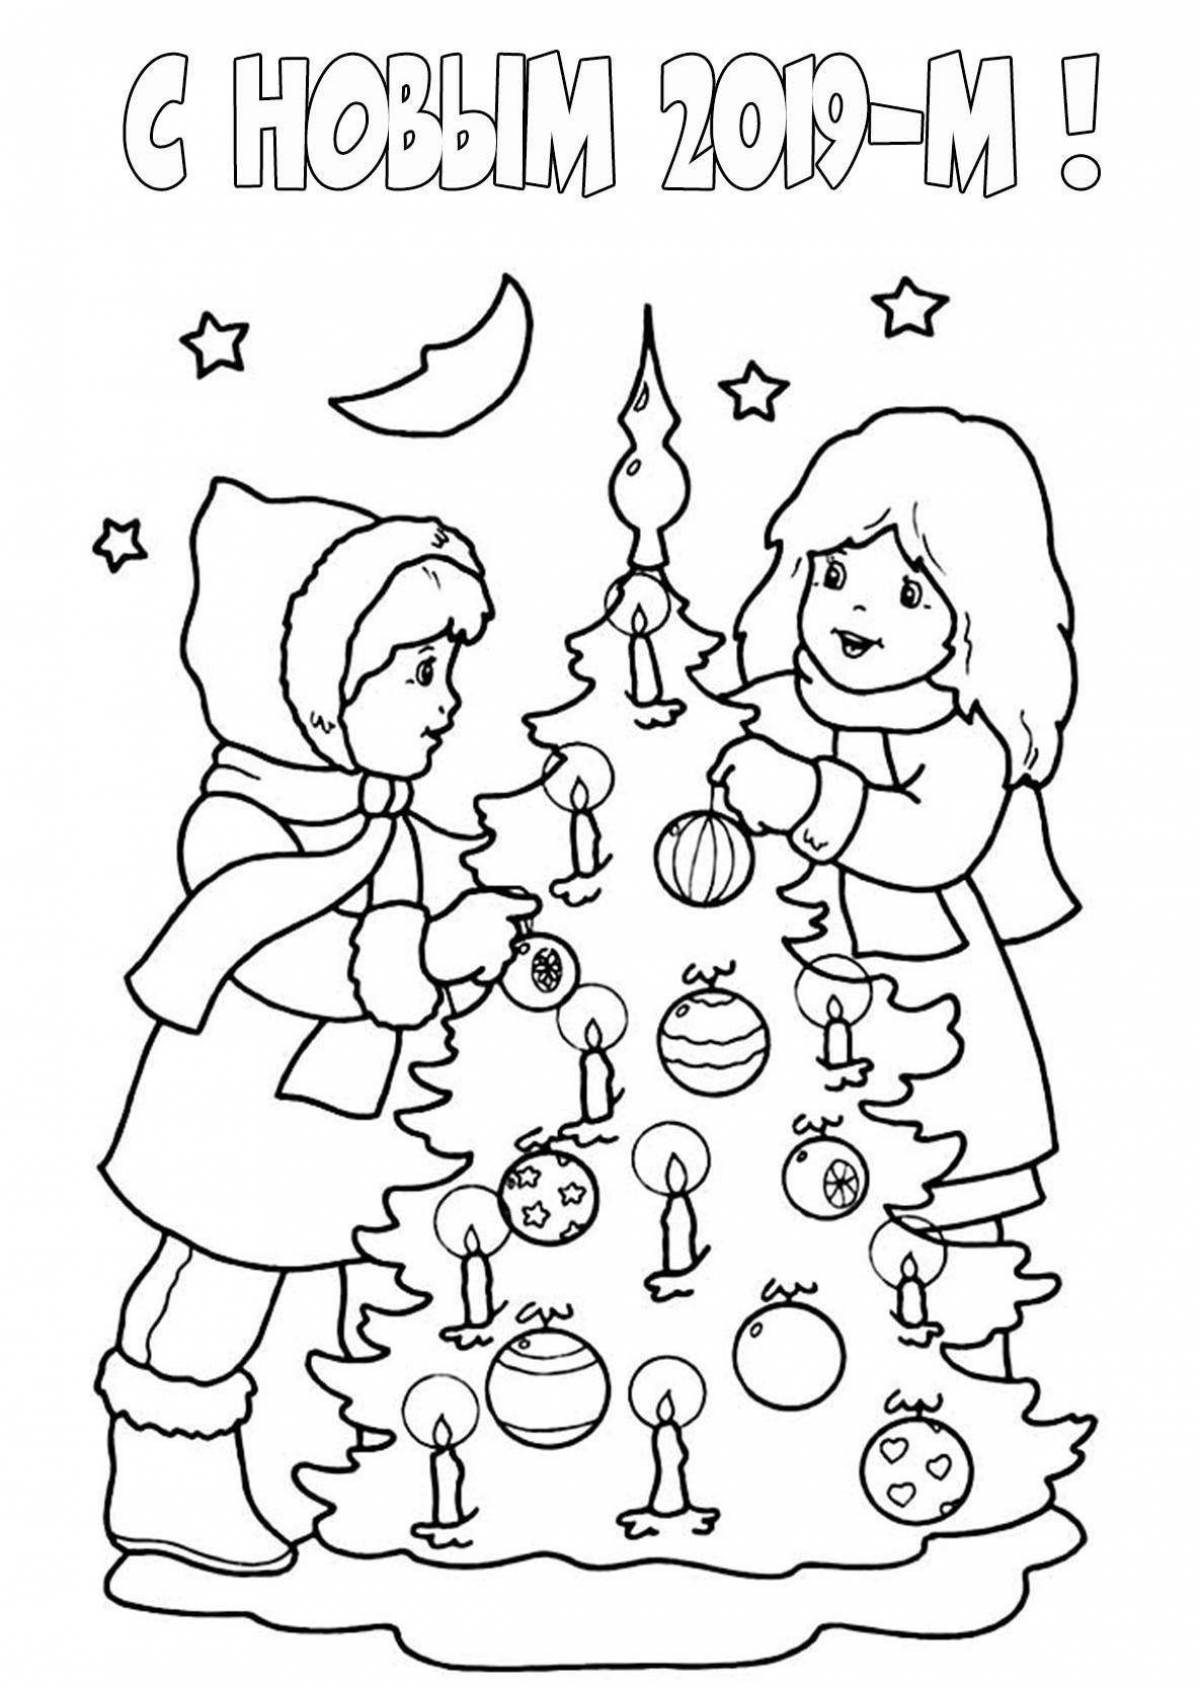 Animated children decorate the Christmas tree